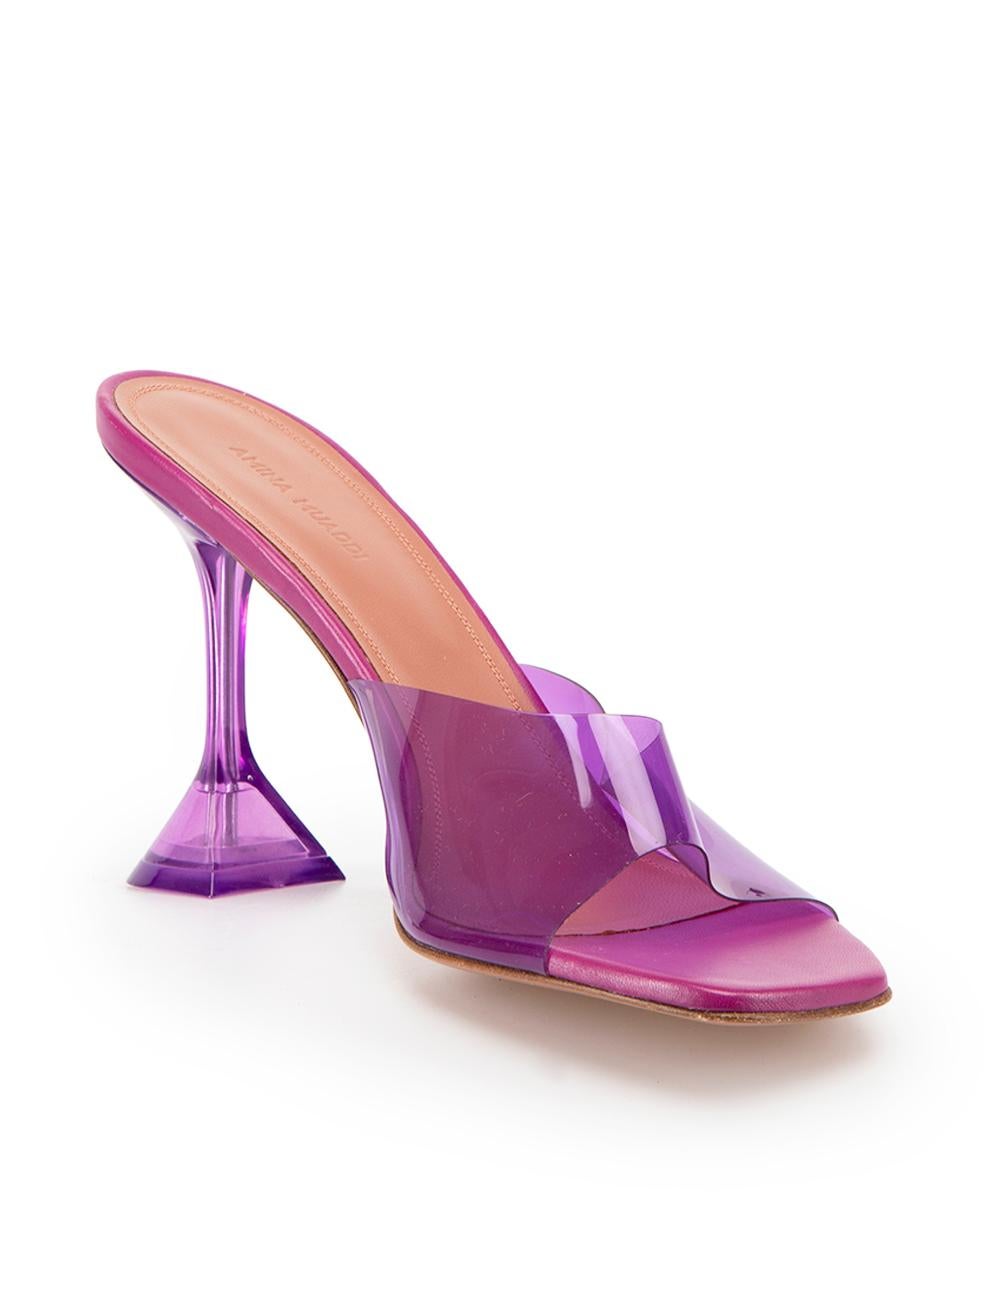 CONDITION is Very good. Minimal wear to mule is evident. Minimal wear to soles with minor scuffing on this used Amina Muaddi designer resale item.



Details


Purple

PVC

Slip-on mules

High heeled

Open-toe

Transparent



 

Made in